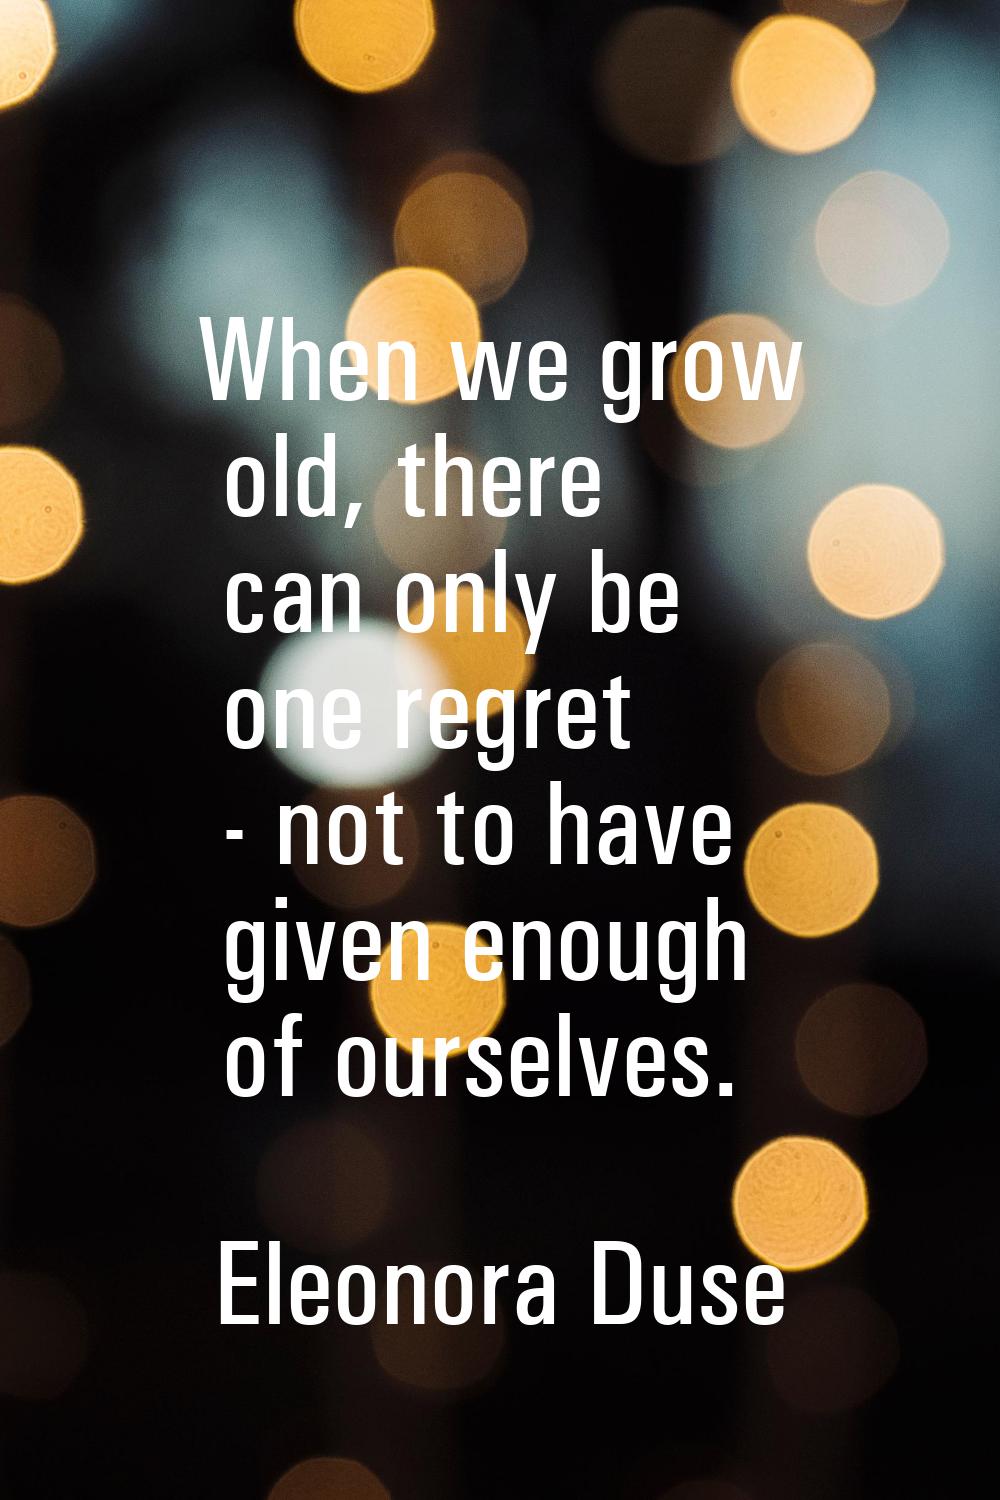 When we grow old, there can only be one regret - not to have given enough of ourselves.